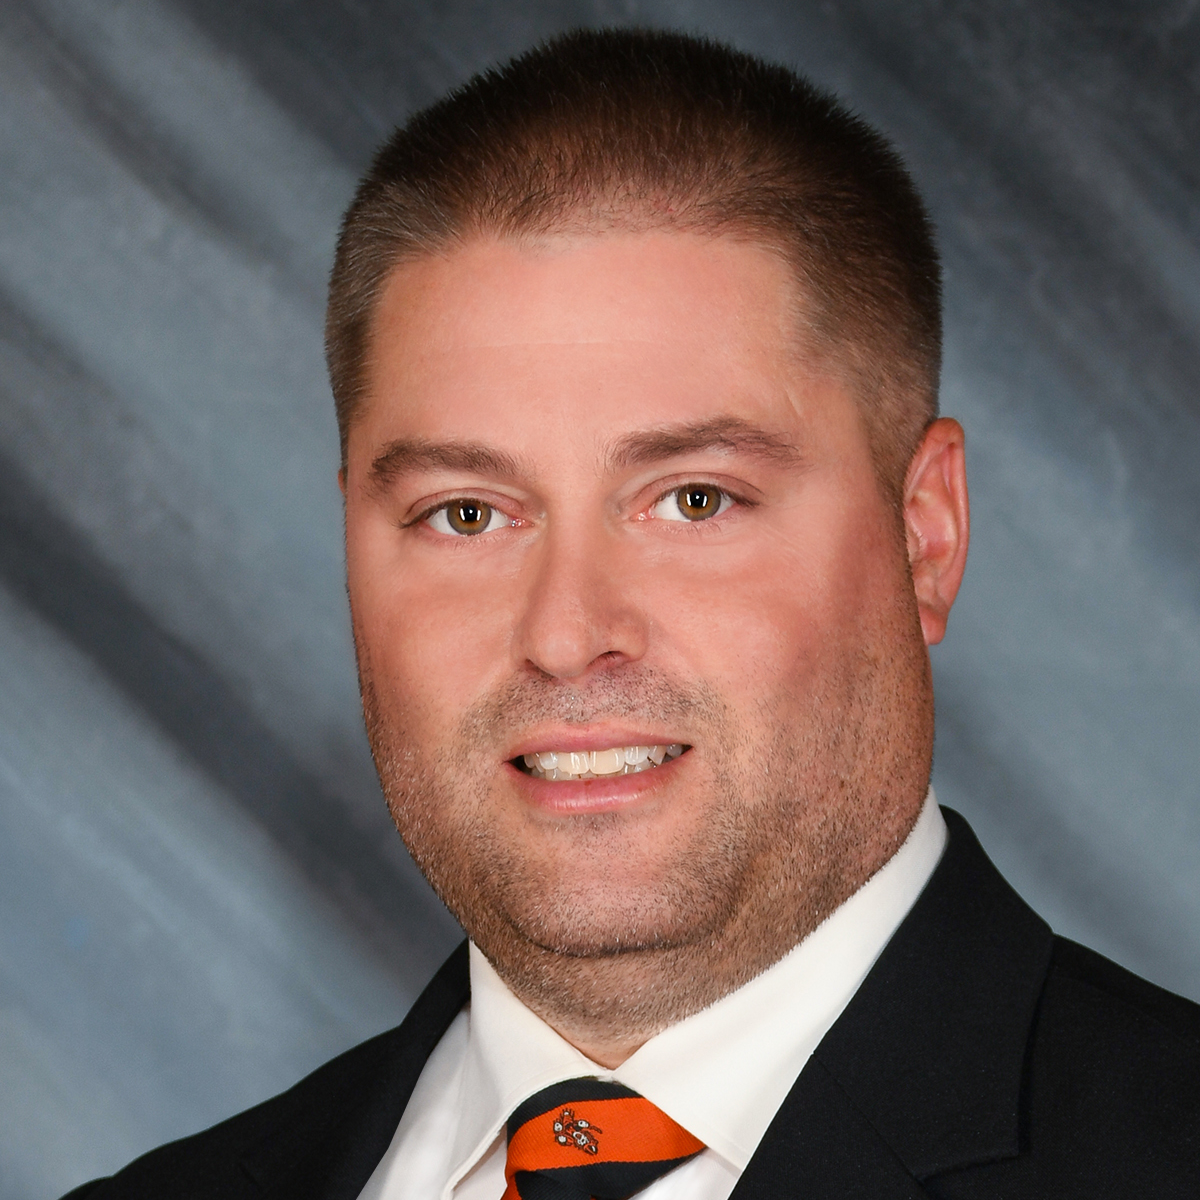 Athletic Director - Nate Moore